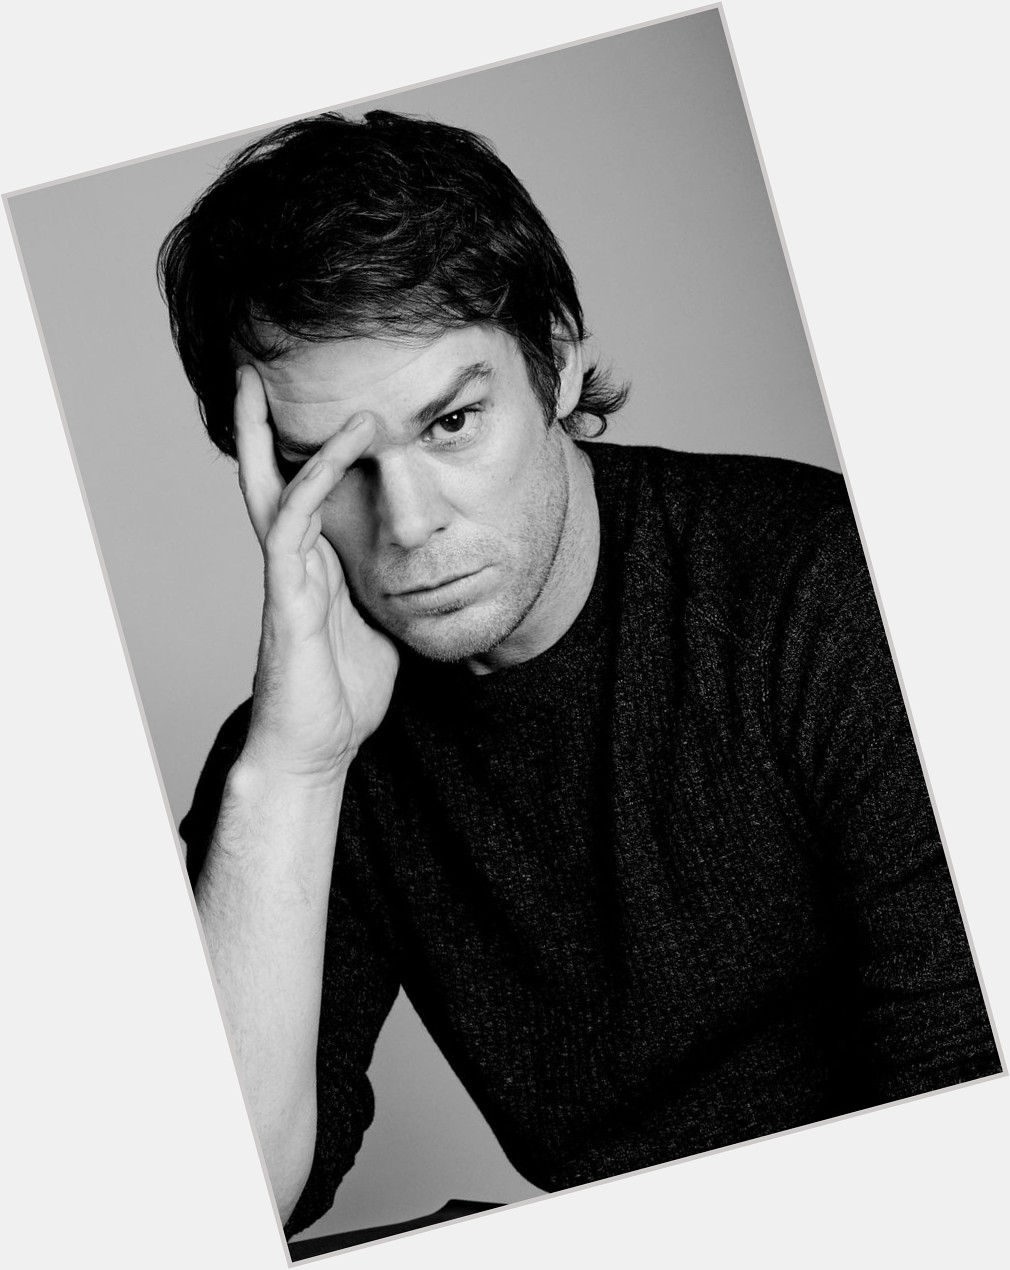 Happy Birthday to the lovely Michael C Hall      